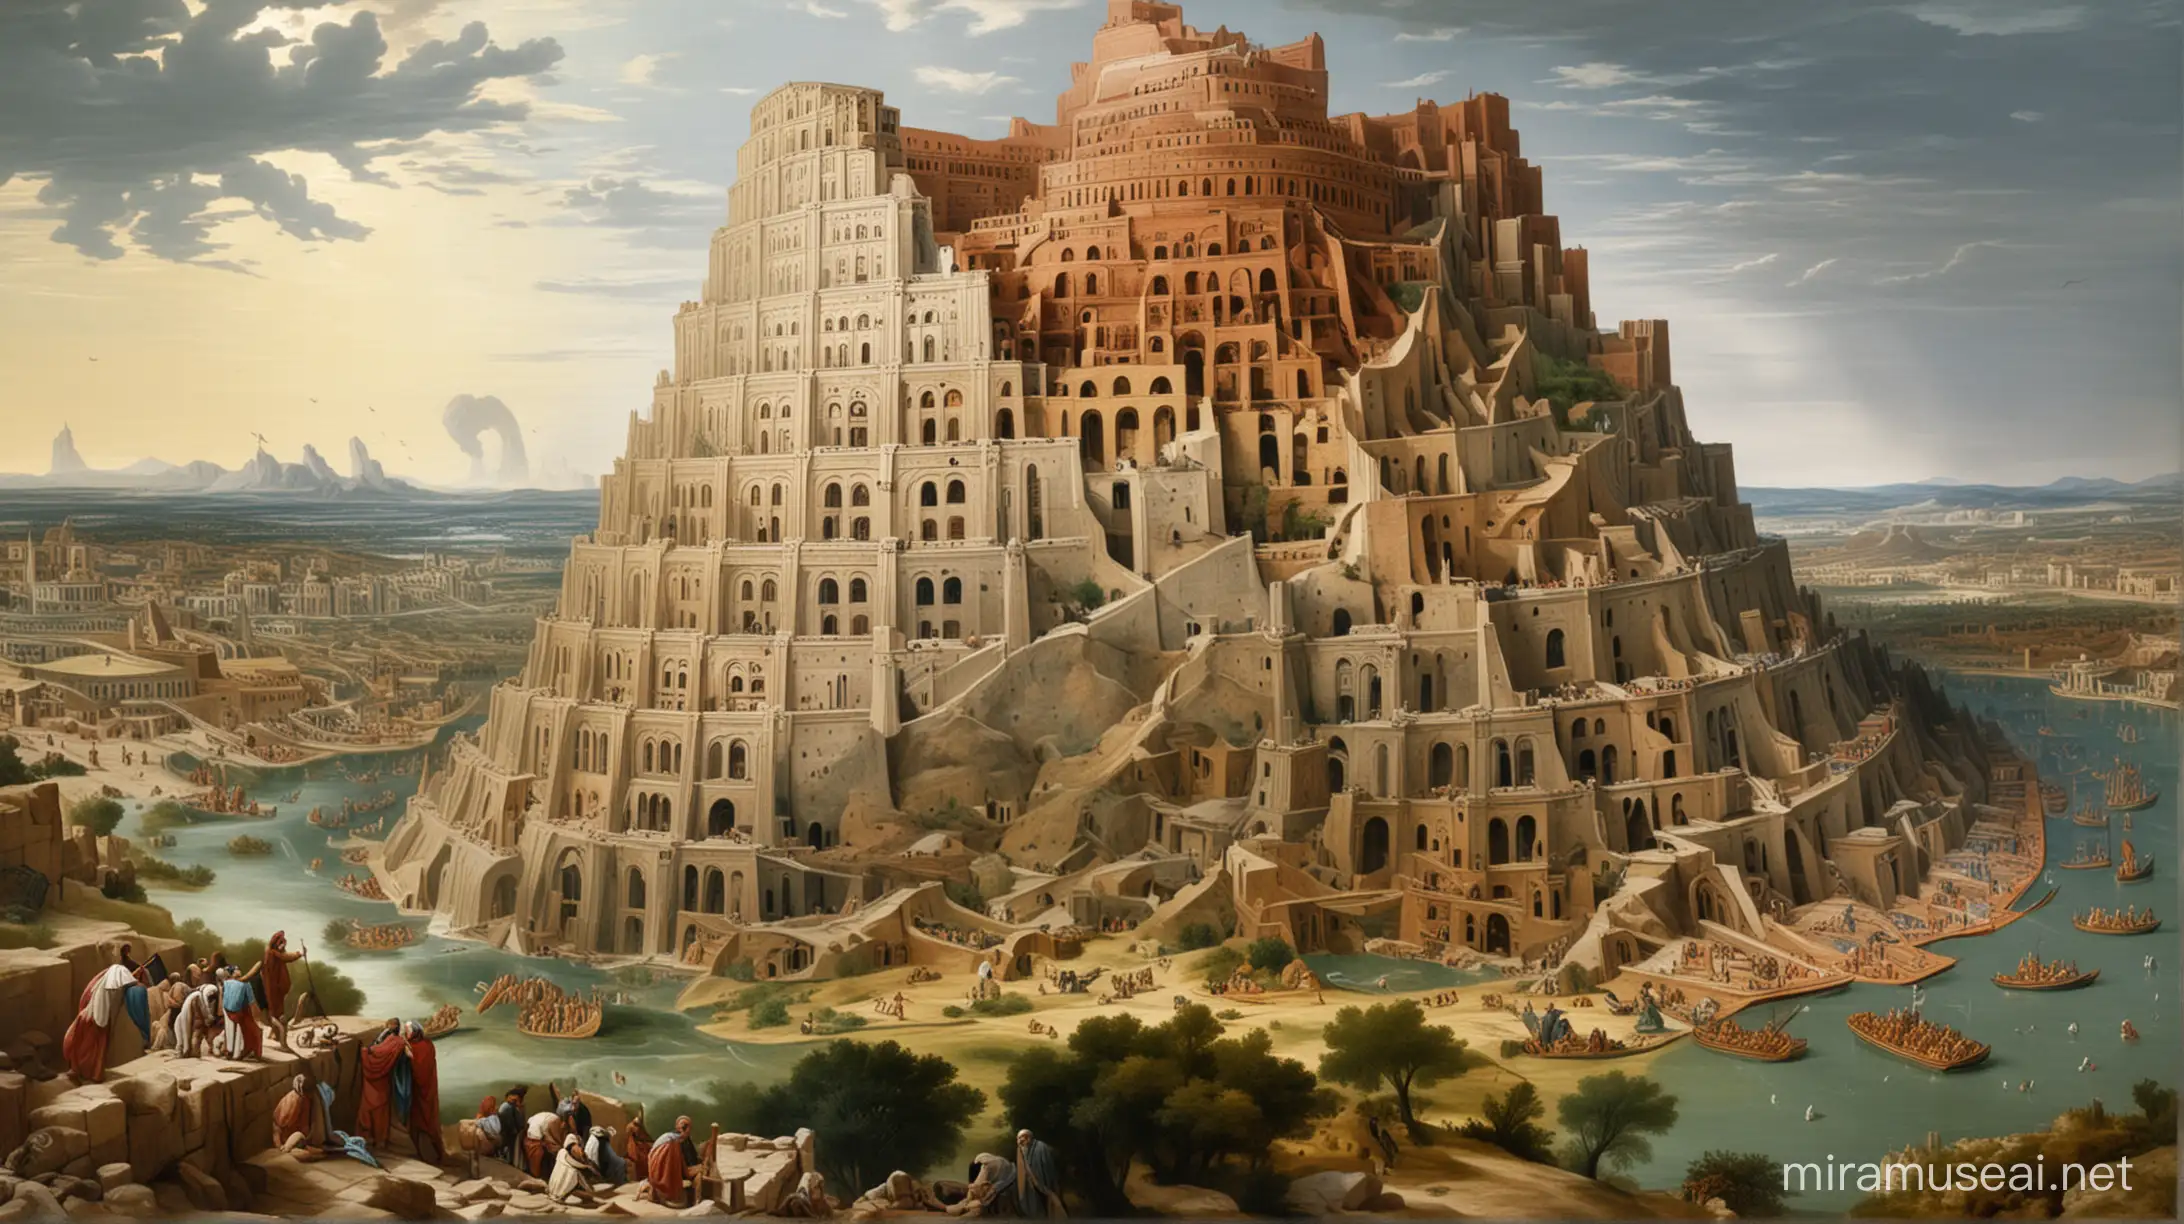 The Tower of Babel, in the biblical era